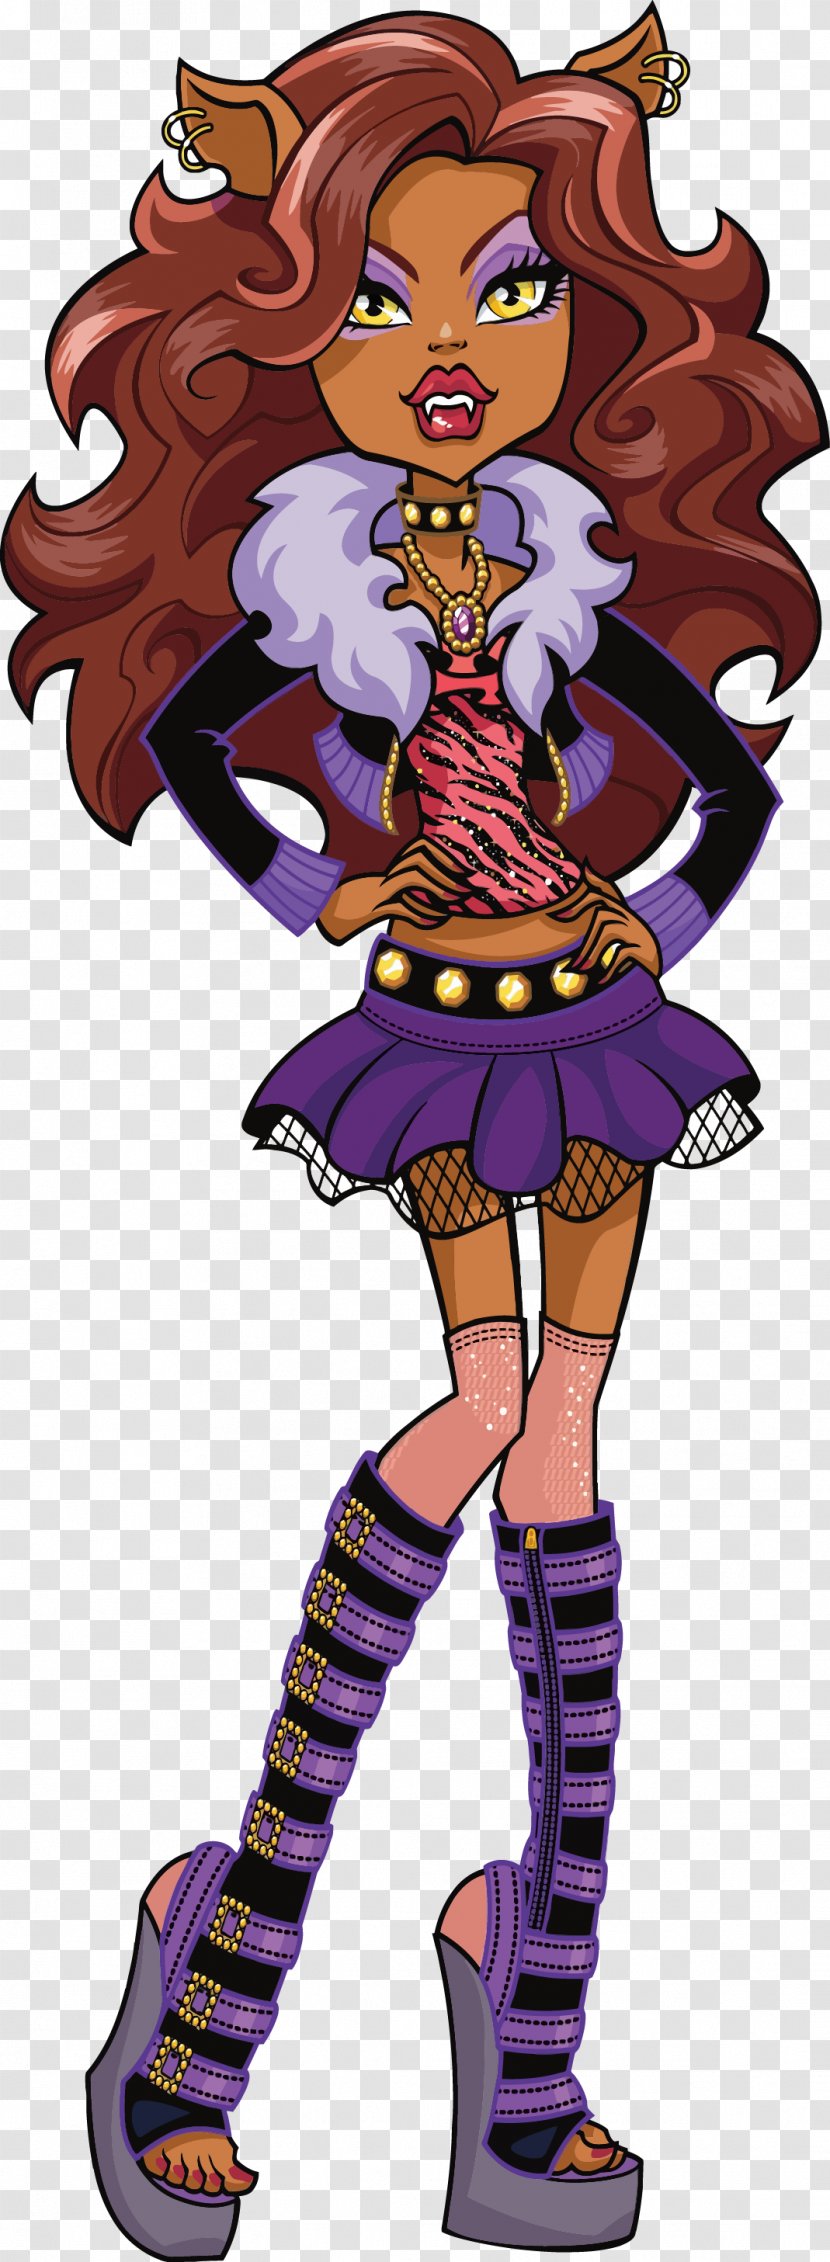 Monster High Clawdeen Wolf Doll Frankie Stein - Original Ghouls Collection Transparent PNG